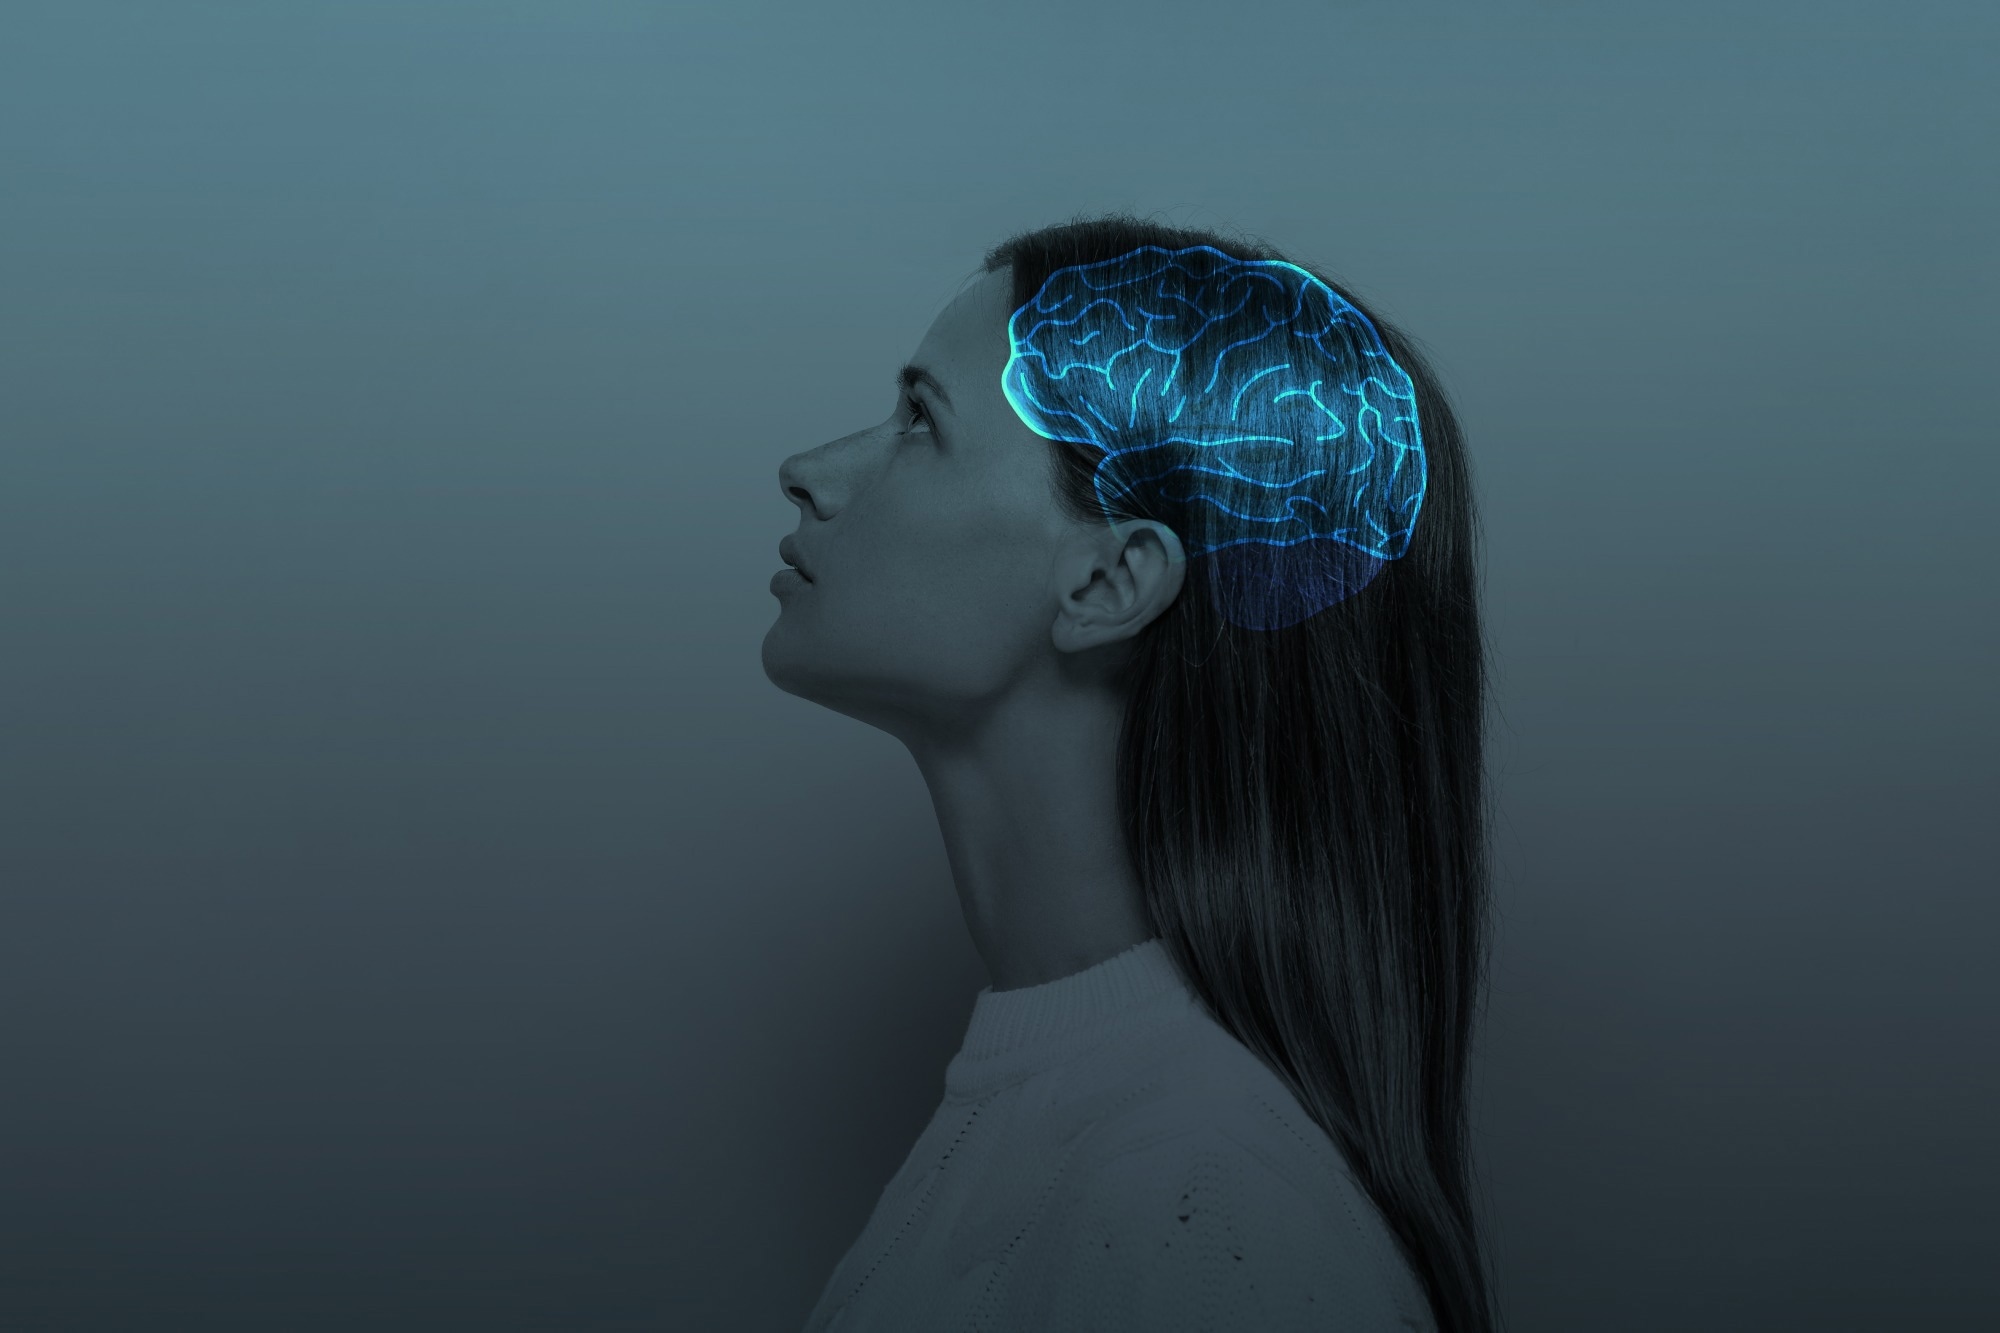 Study: Proteomic insights into mental health conditions: plasma markers in young adults.  Image credit: Pavlova Yuliia / Shutterstock.com